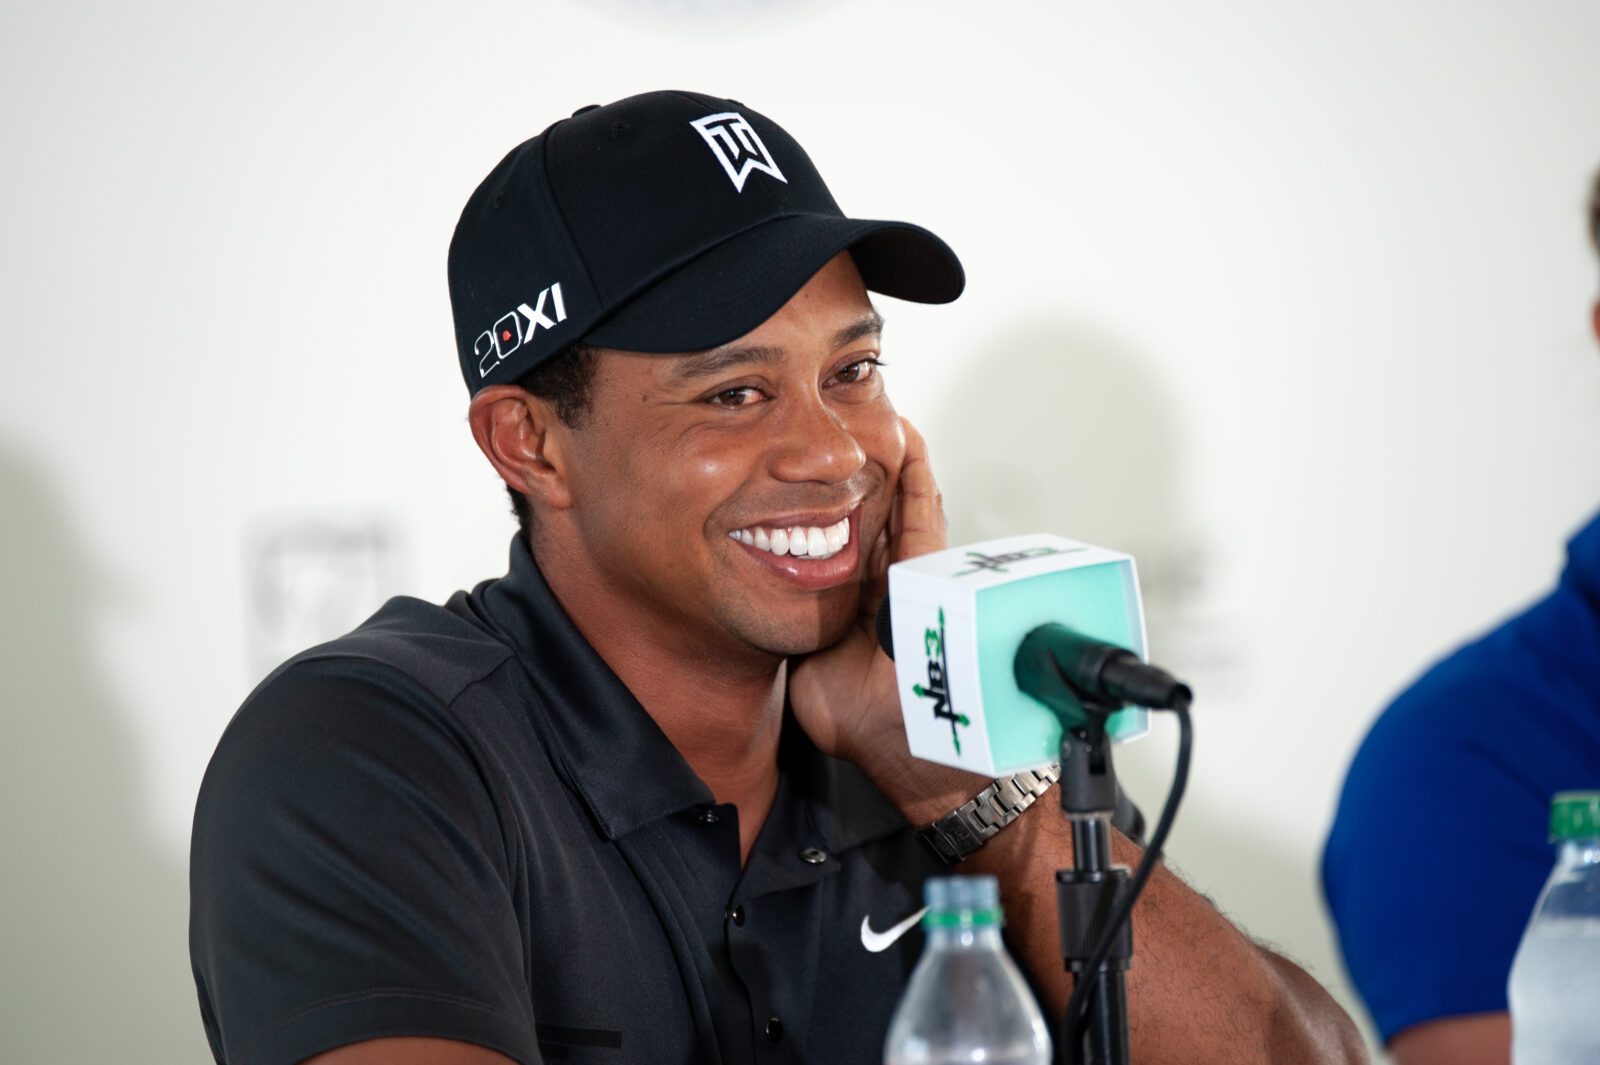 Tiger Woods and Rory McIlroy to Team Up Against Jordan Spieth and Justin Thomas in The Match